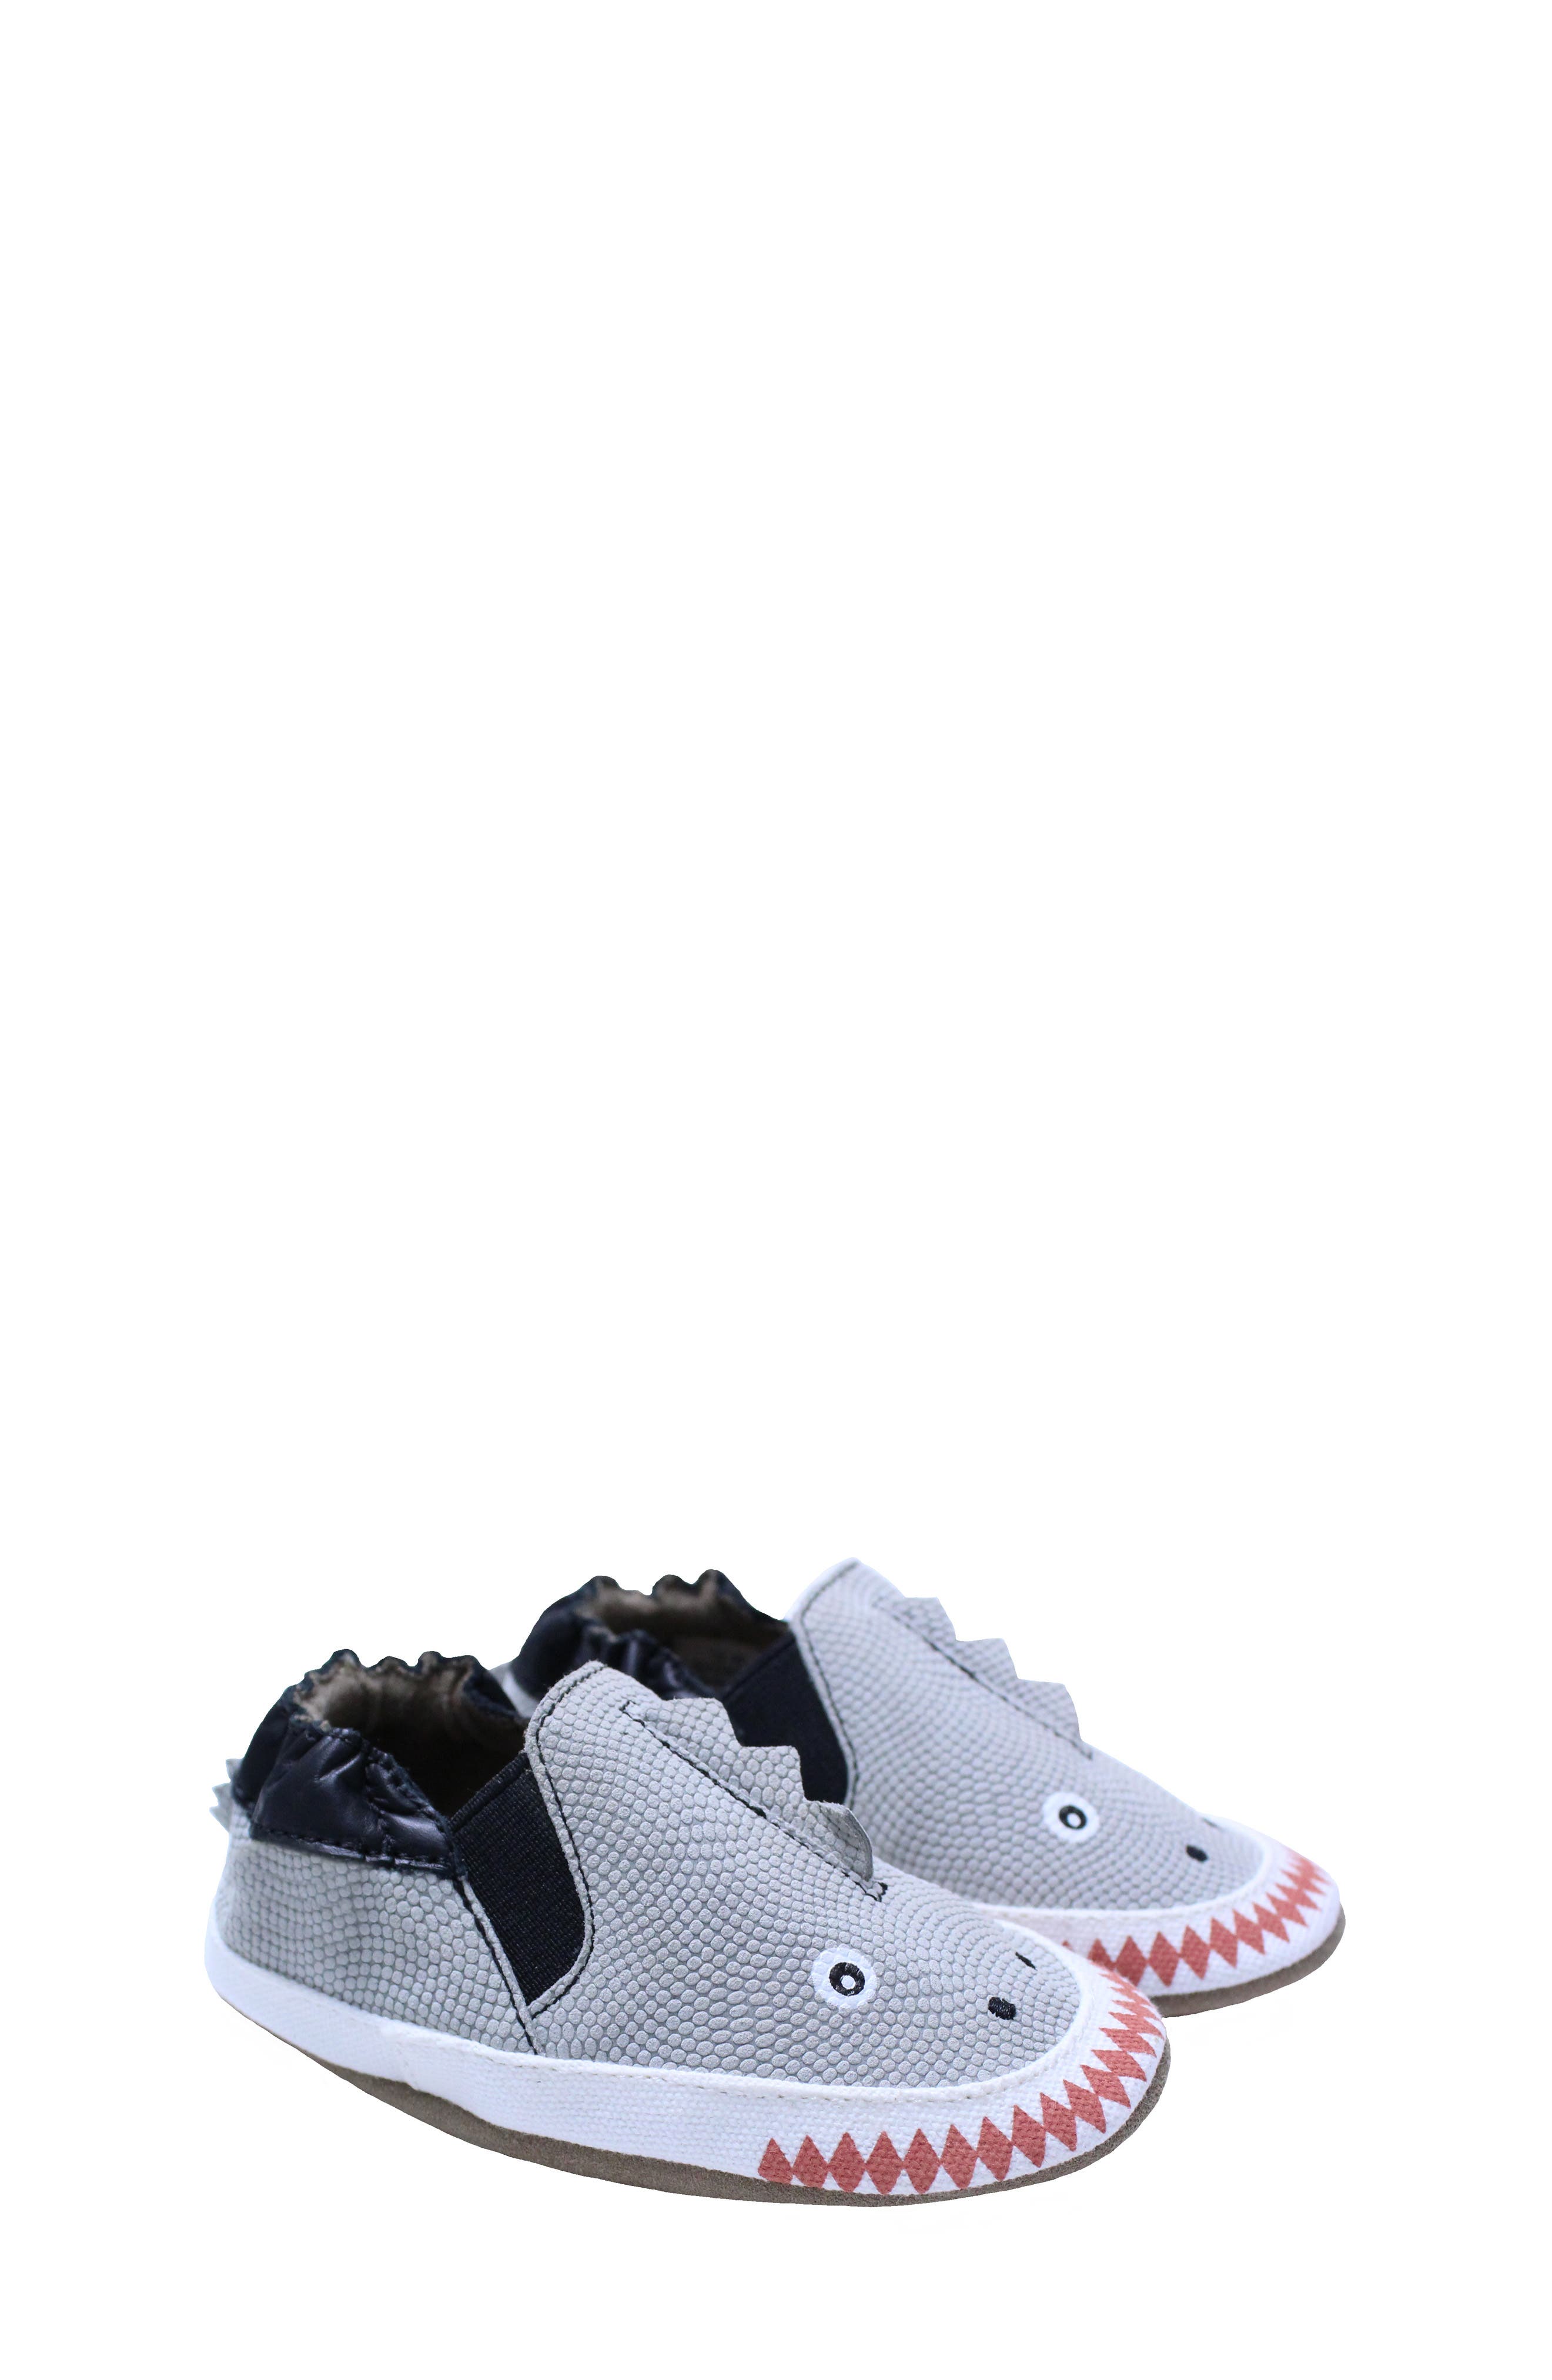 nordstrom baby walking shoes